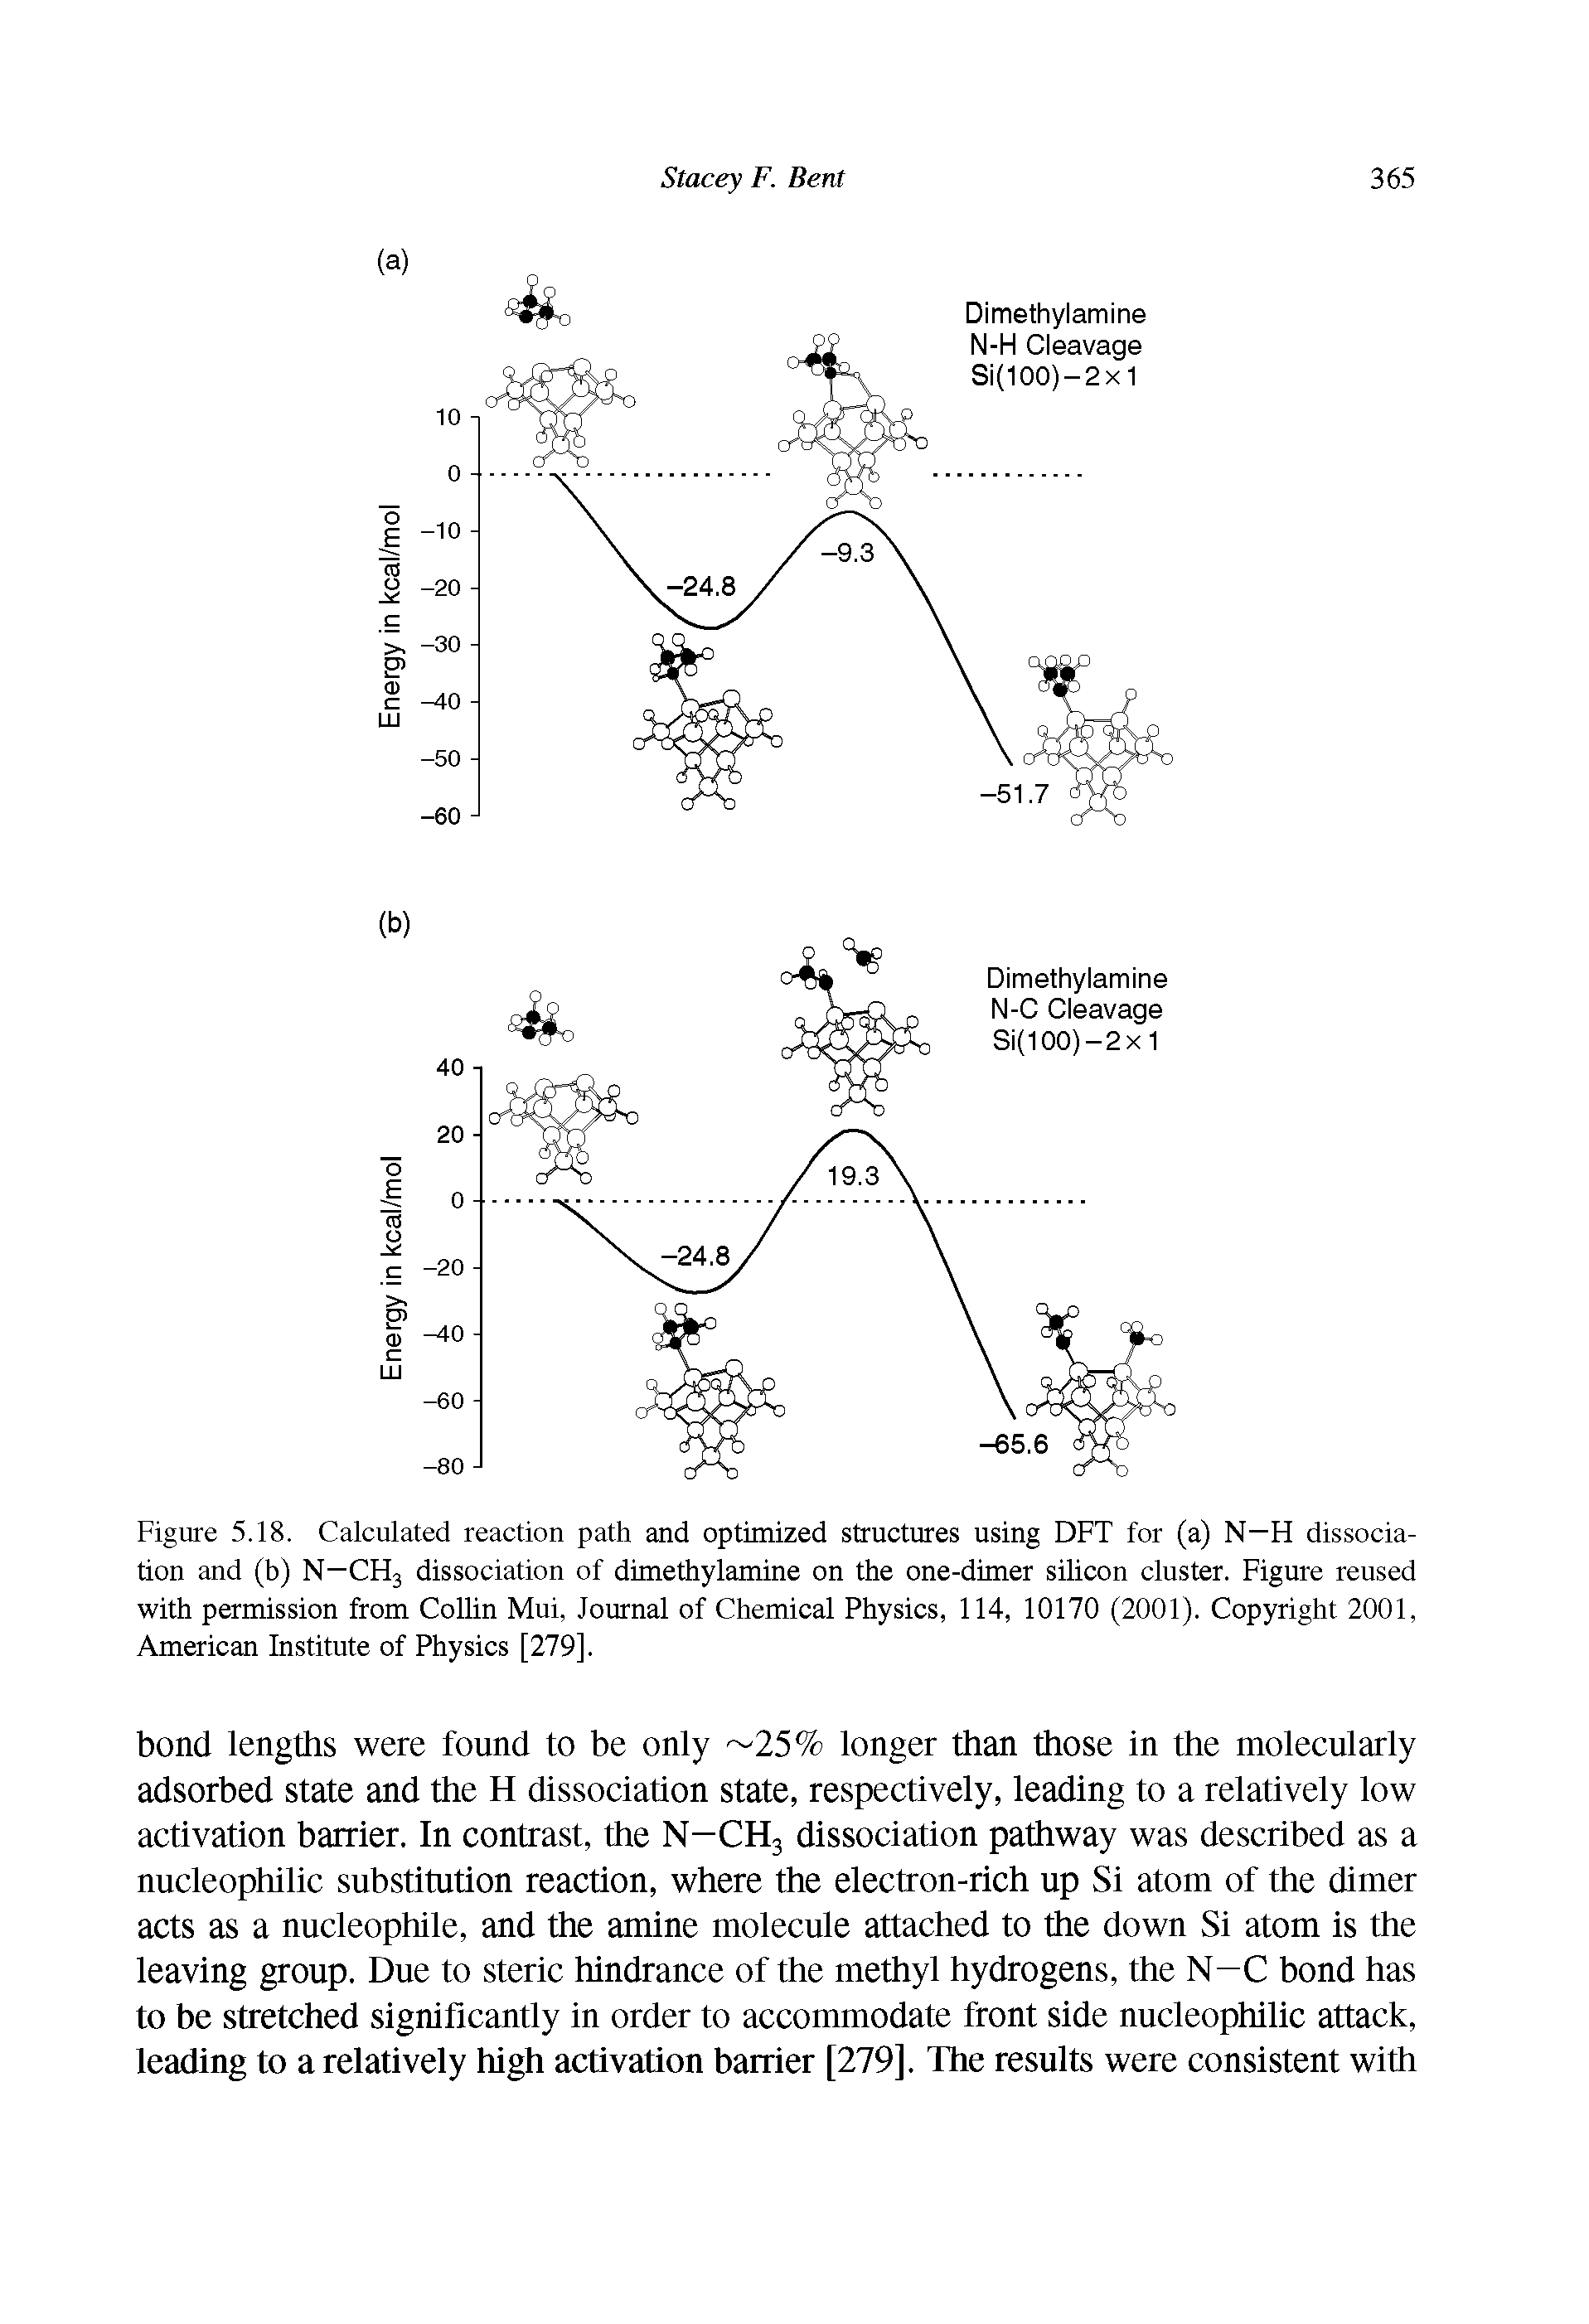 Figure 5.18. Calculated reaction path and optimized structures using DFT for (a) N—H dissociation and (b) N—CH3 dissociation of dimethylamine on the one-dimer silicon cluster. Figure reused with permission from Collin Mui, Journal of Chemical Physics, 114, 10170 (2001). Copyright 2001, American Institute of Physics [279].